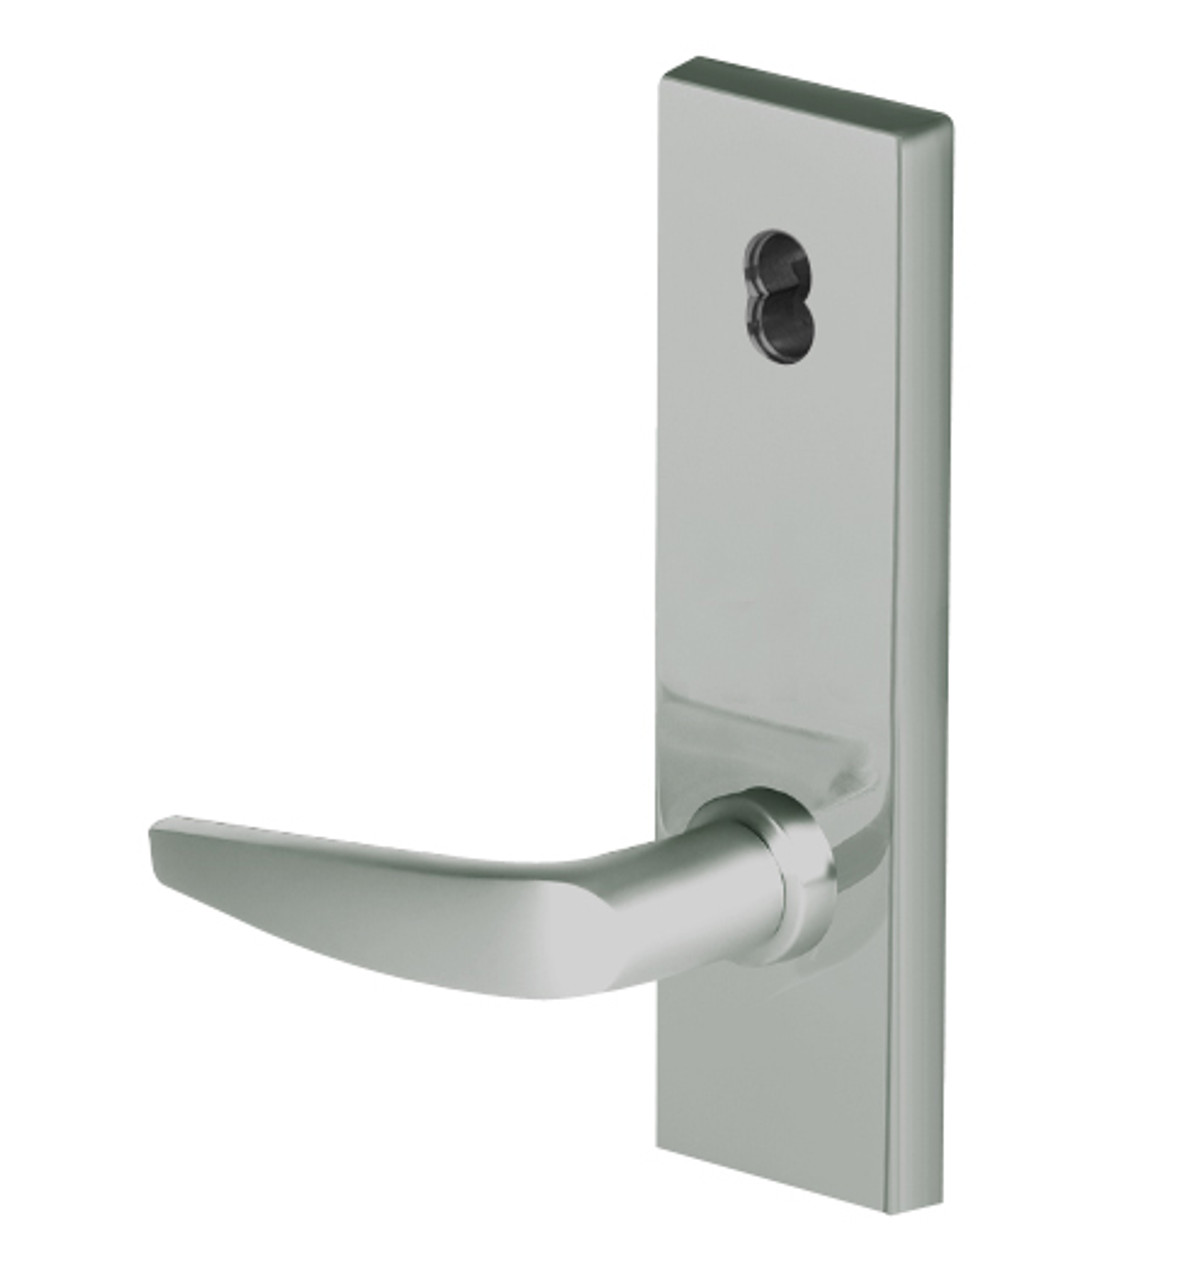 45HW7TWEU16N619RQE12V Best 40HW series Double Key Deadbolt Fail Secure Electromechanical Mortise Lever Lock with Curved w/ No Return Style in Satin Nickel